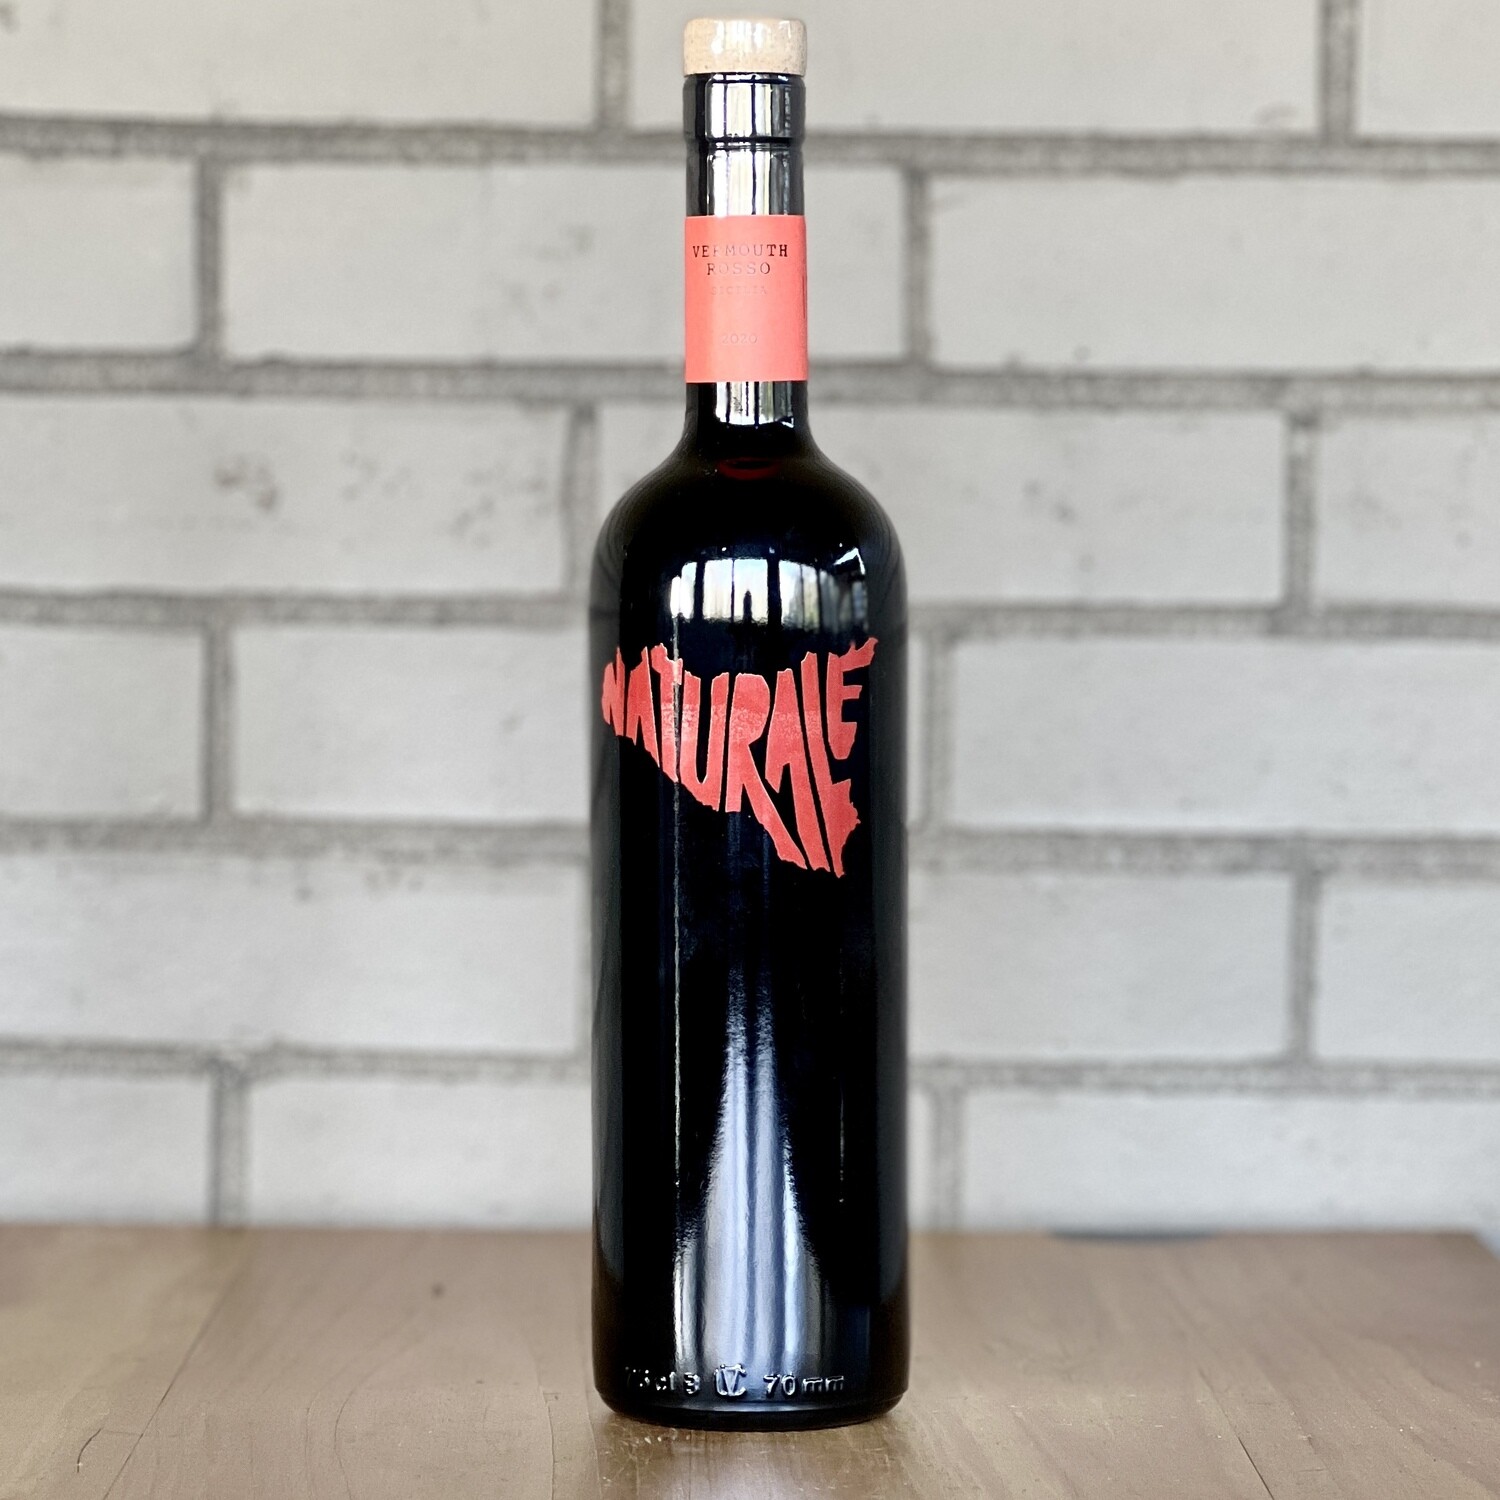 Naturale Vermouth Rosso (750ml)